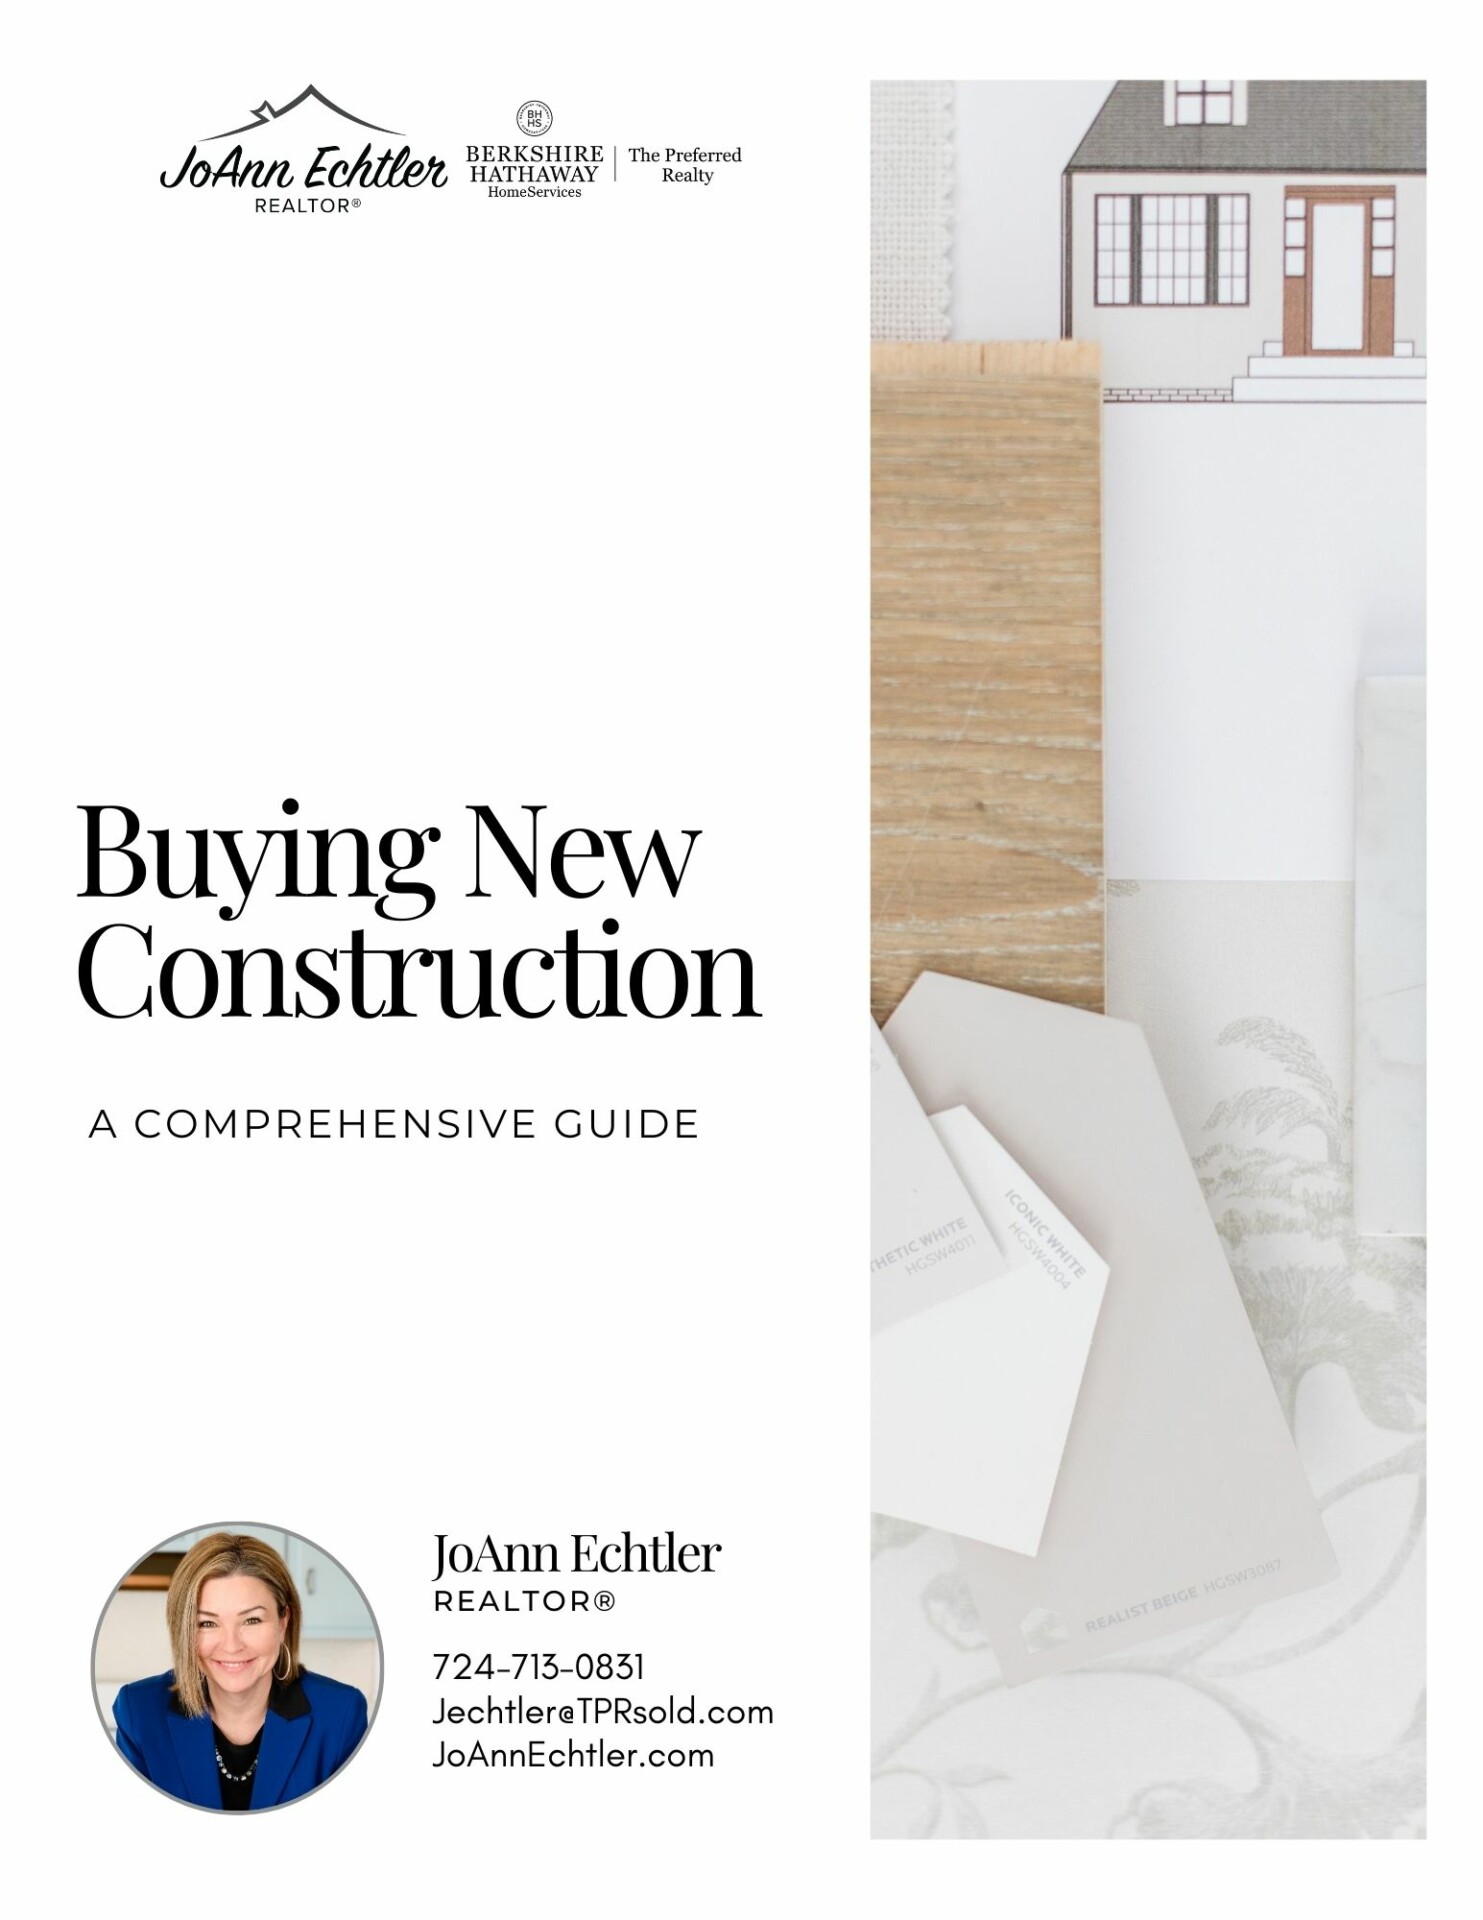 Buying New Construction Guide